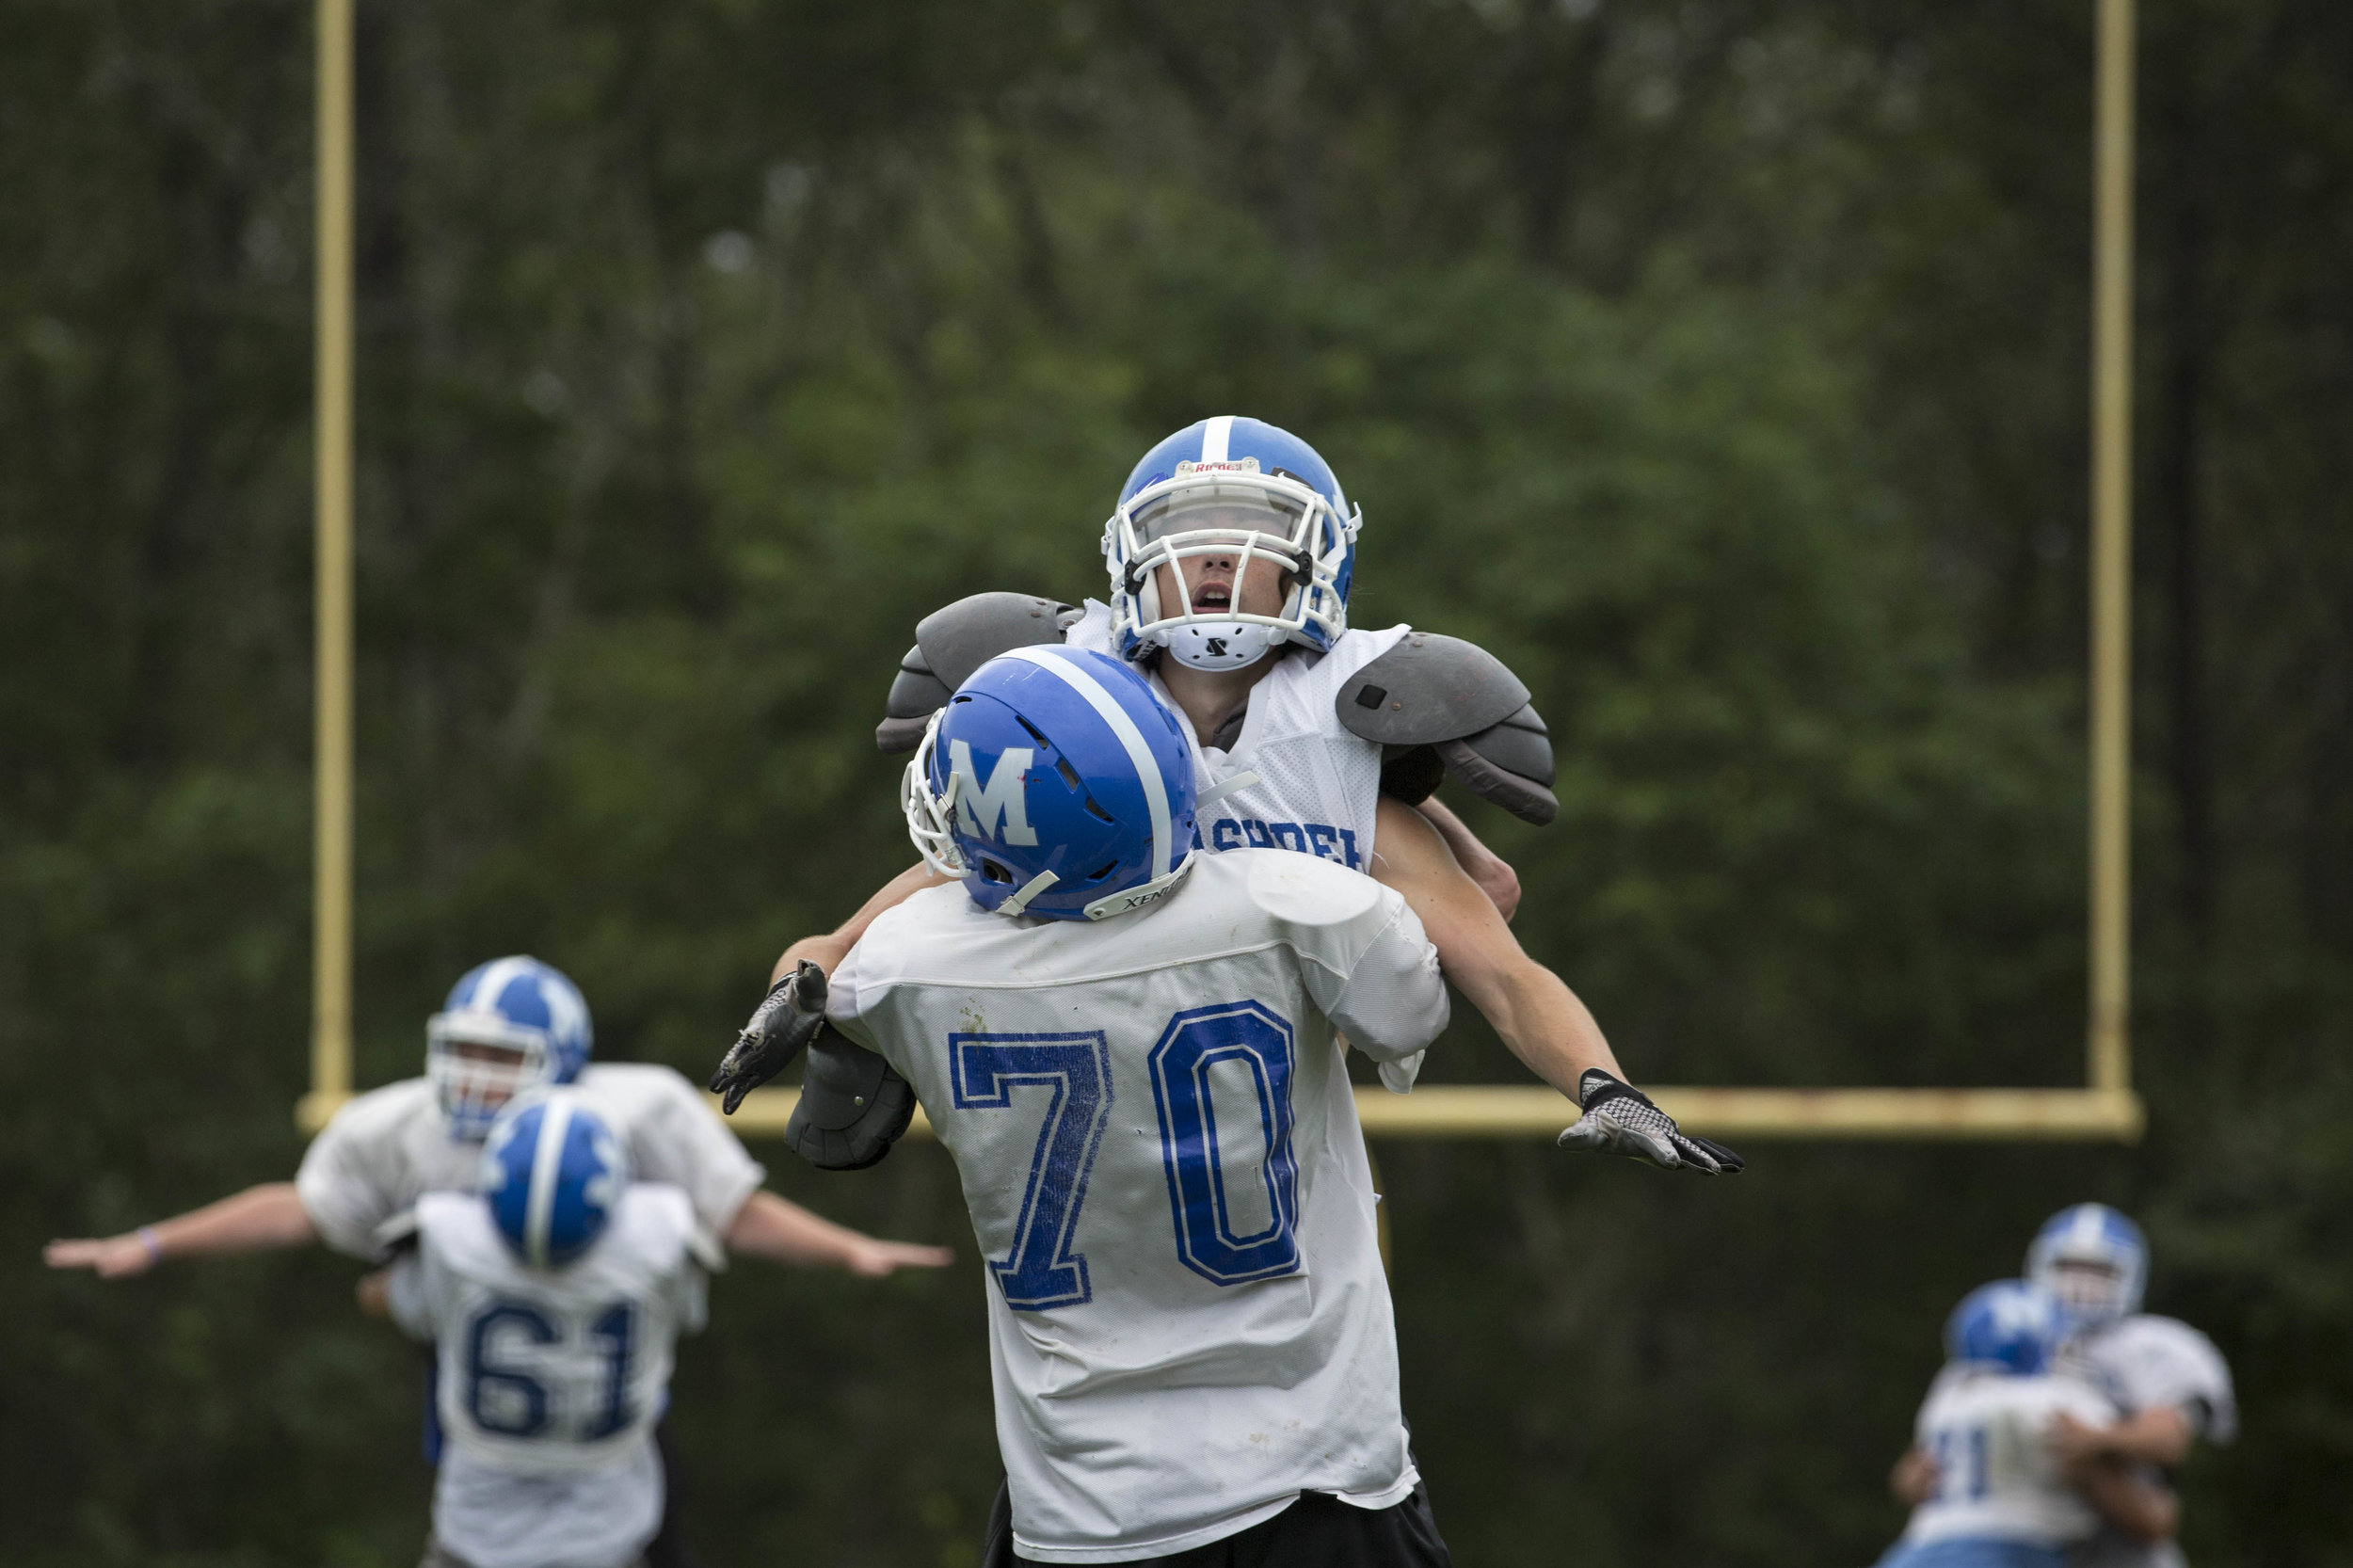  A Mashpee High School football player lifts his teammate into the air during a tackling drill at practice on August 22, 2017. 